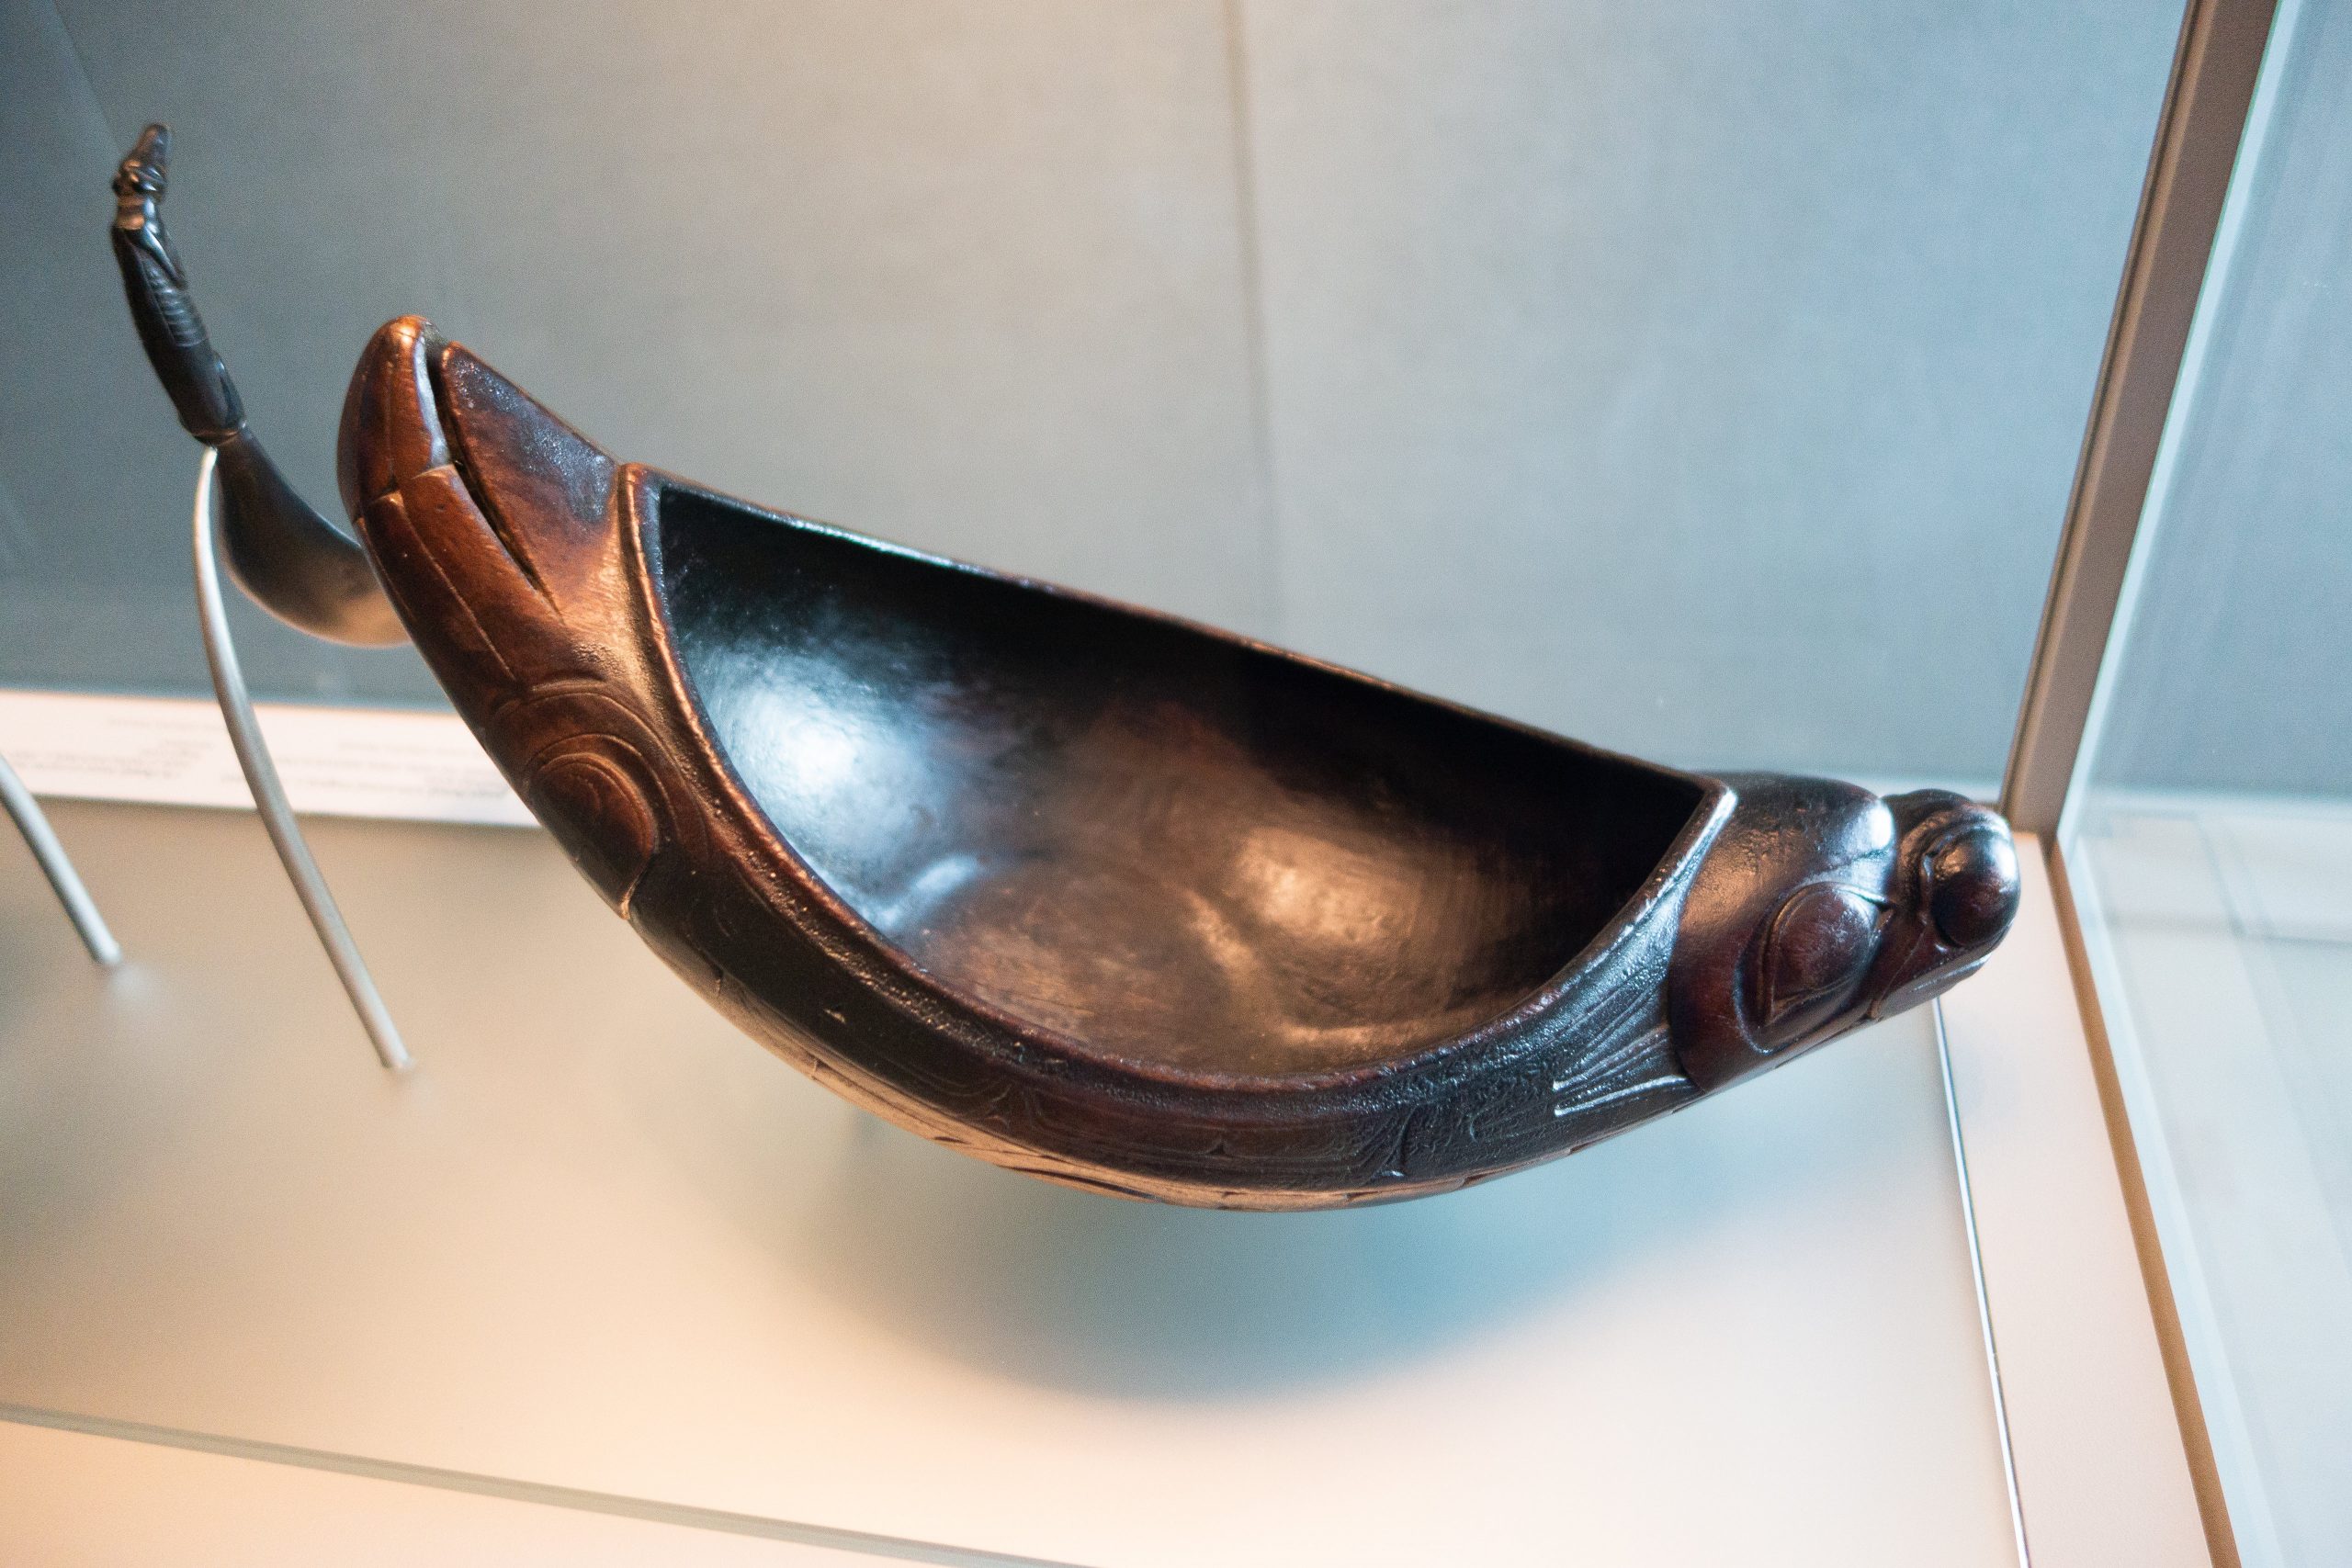 Eulachon Grease Bowl shaped as a seal 1790 (Haida Nation feast bowl). Photo credits to: Thomas Quine. Credits to: UBC, Museum of Anthropology, Vancouver, British Columbia, Canada, 2017 (